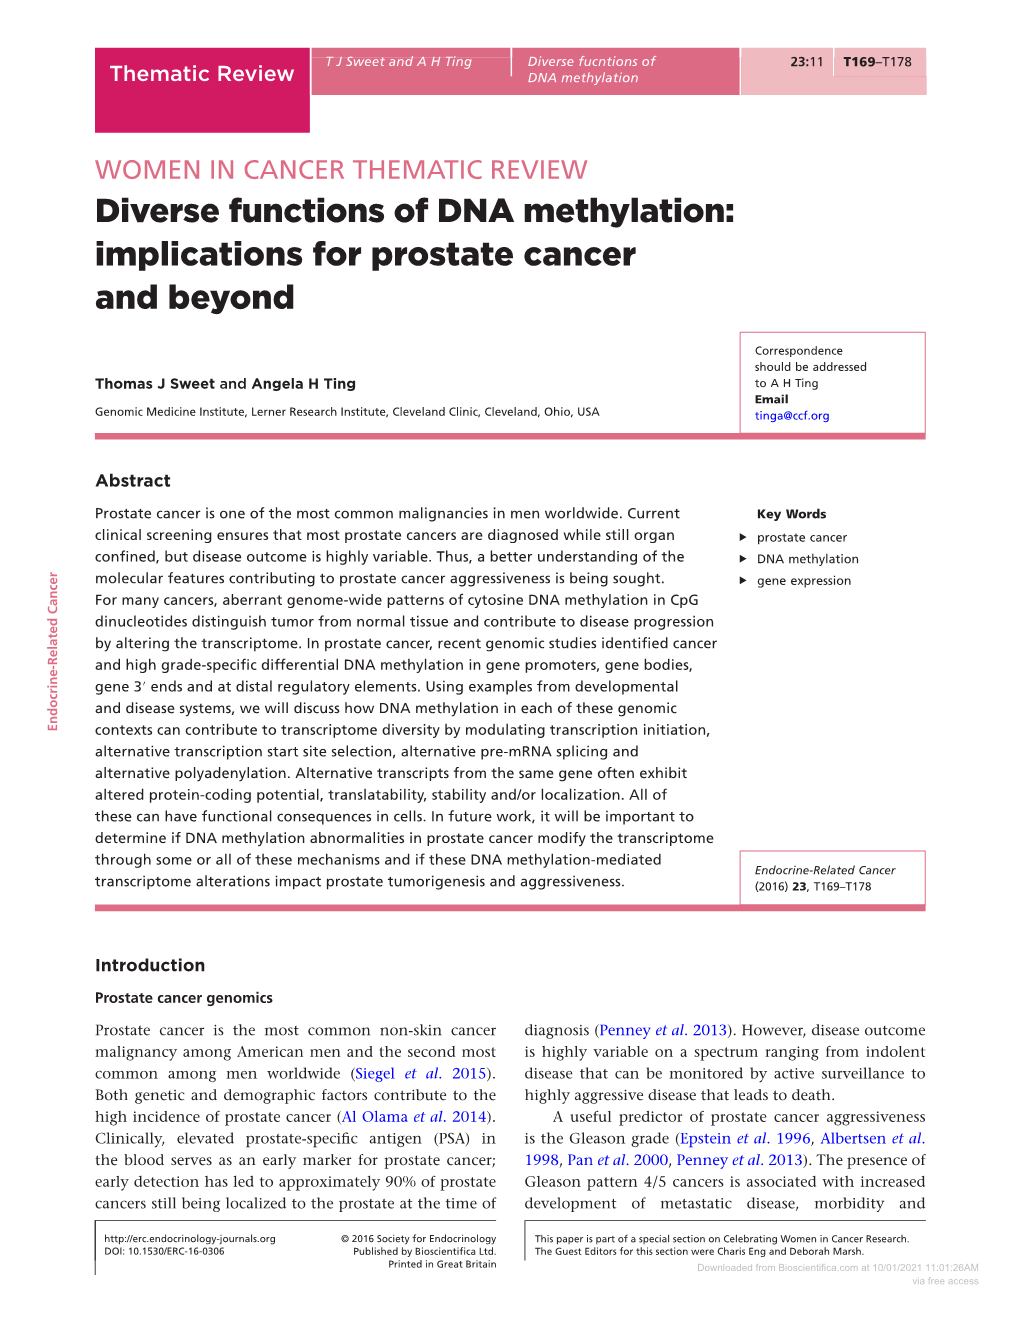 Diverse Functions of DNA Methylation: Implications for Prostate Cancer and Beyond